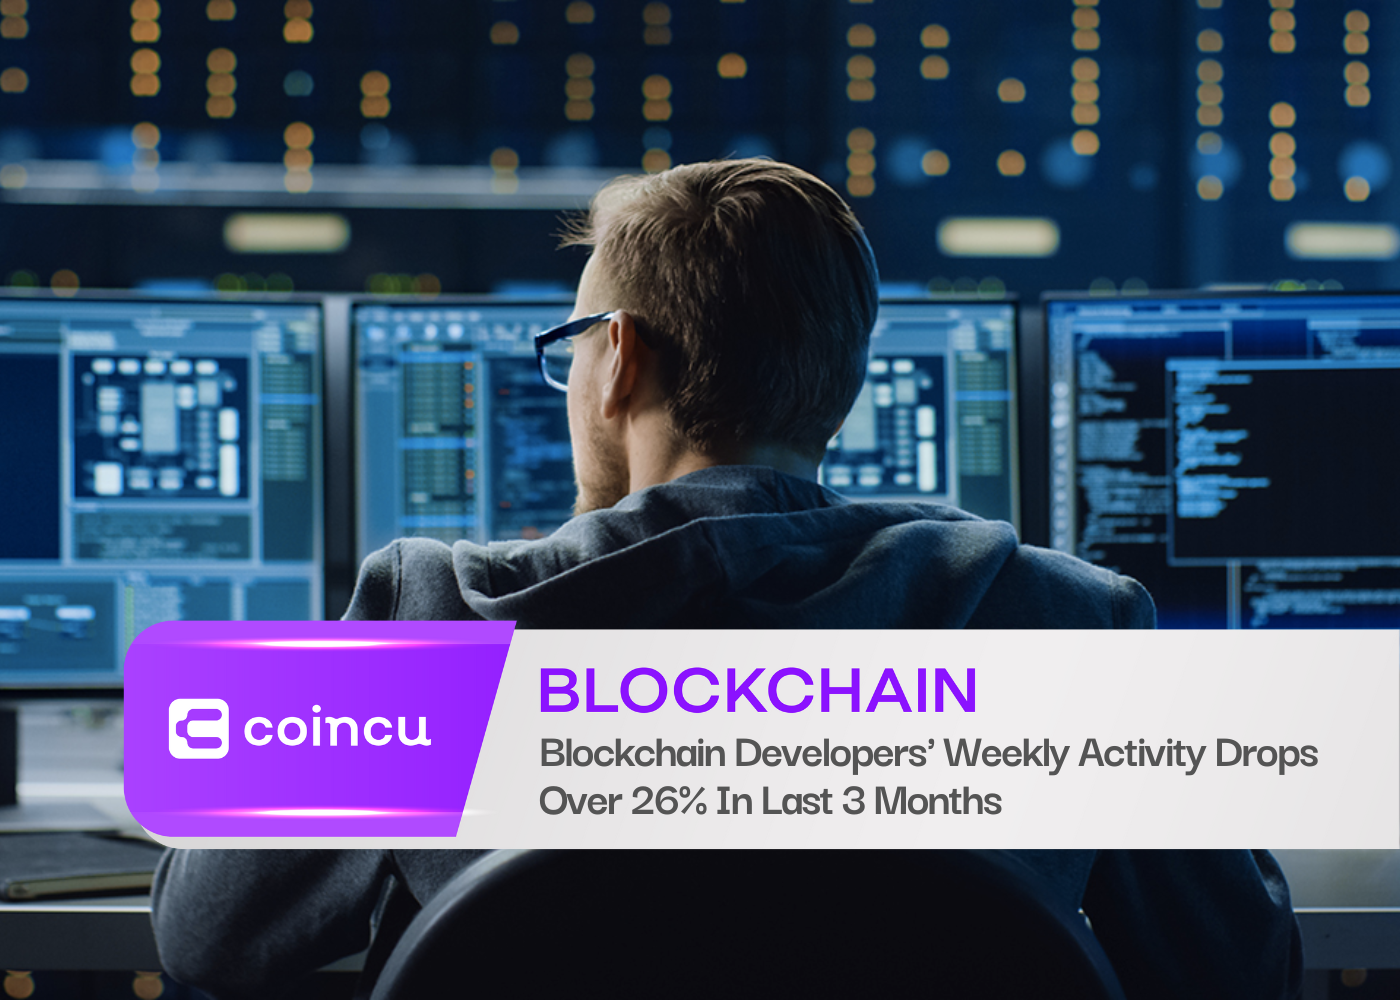 Blockchain Developers' Weekly Activity Drops Over 26% In Last 3 Months